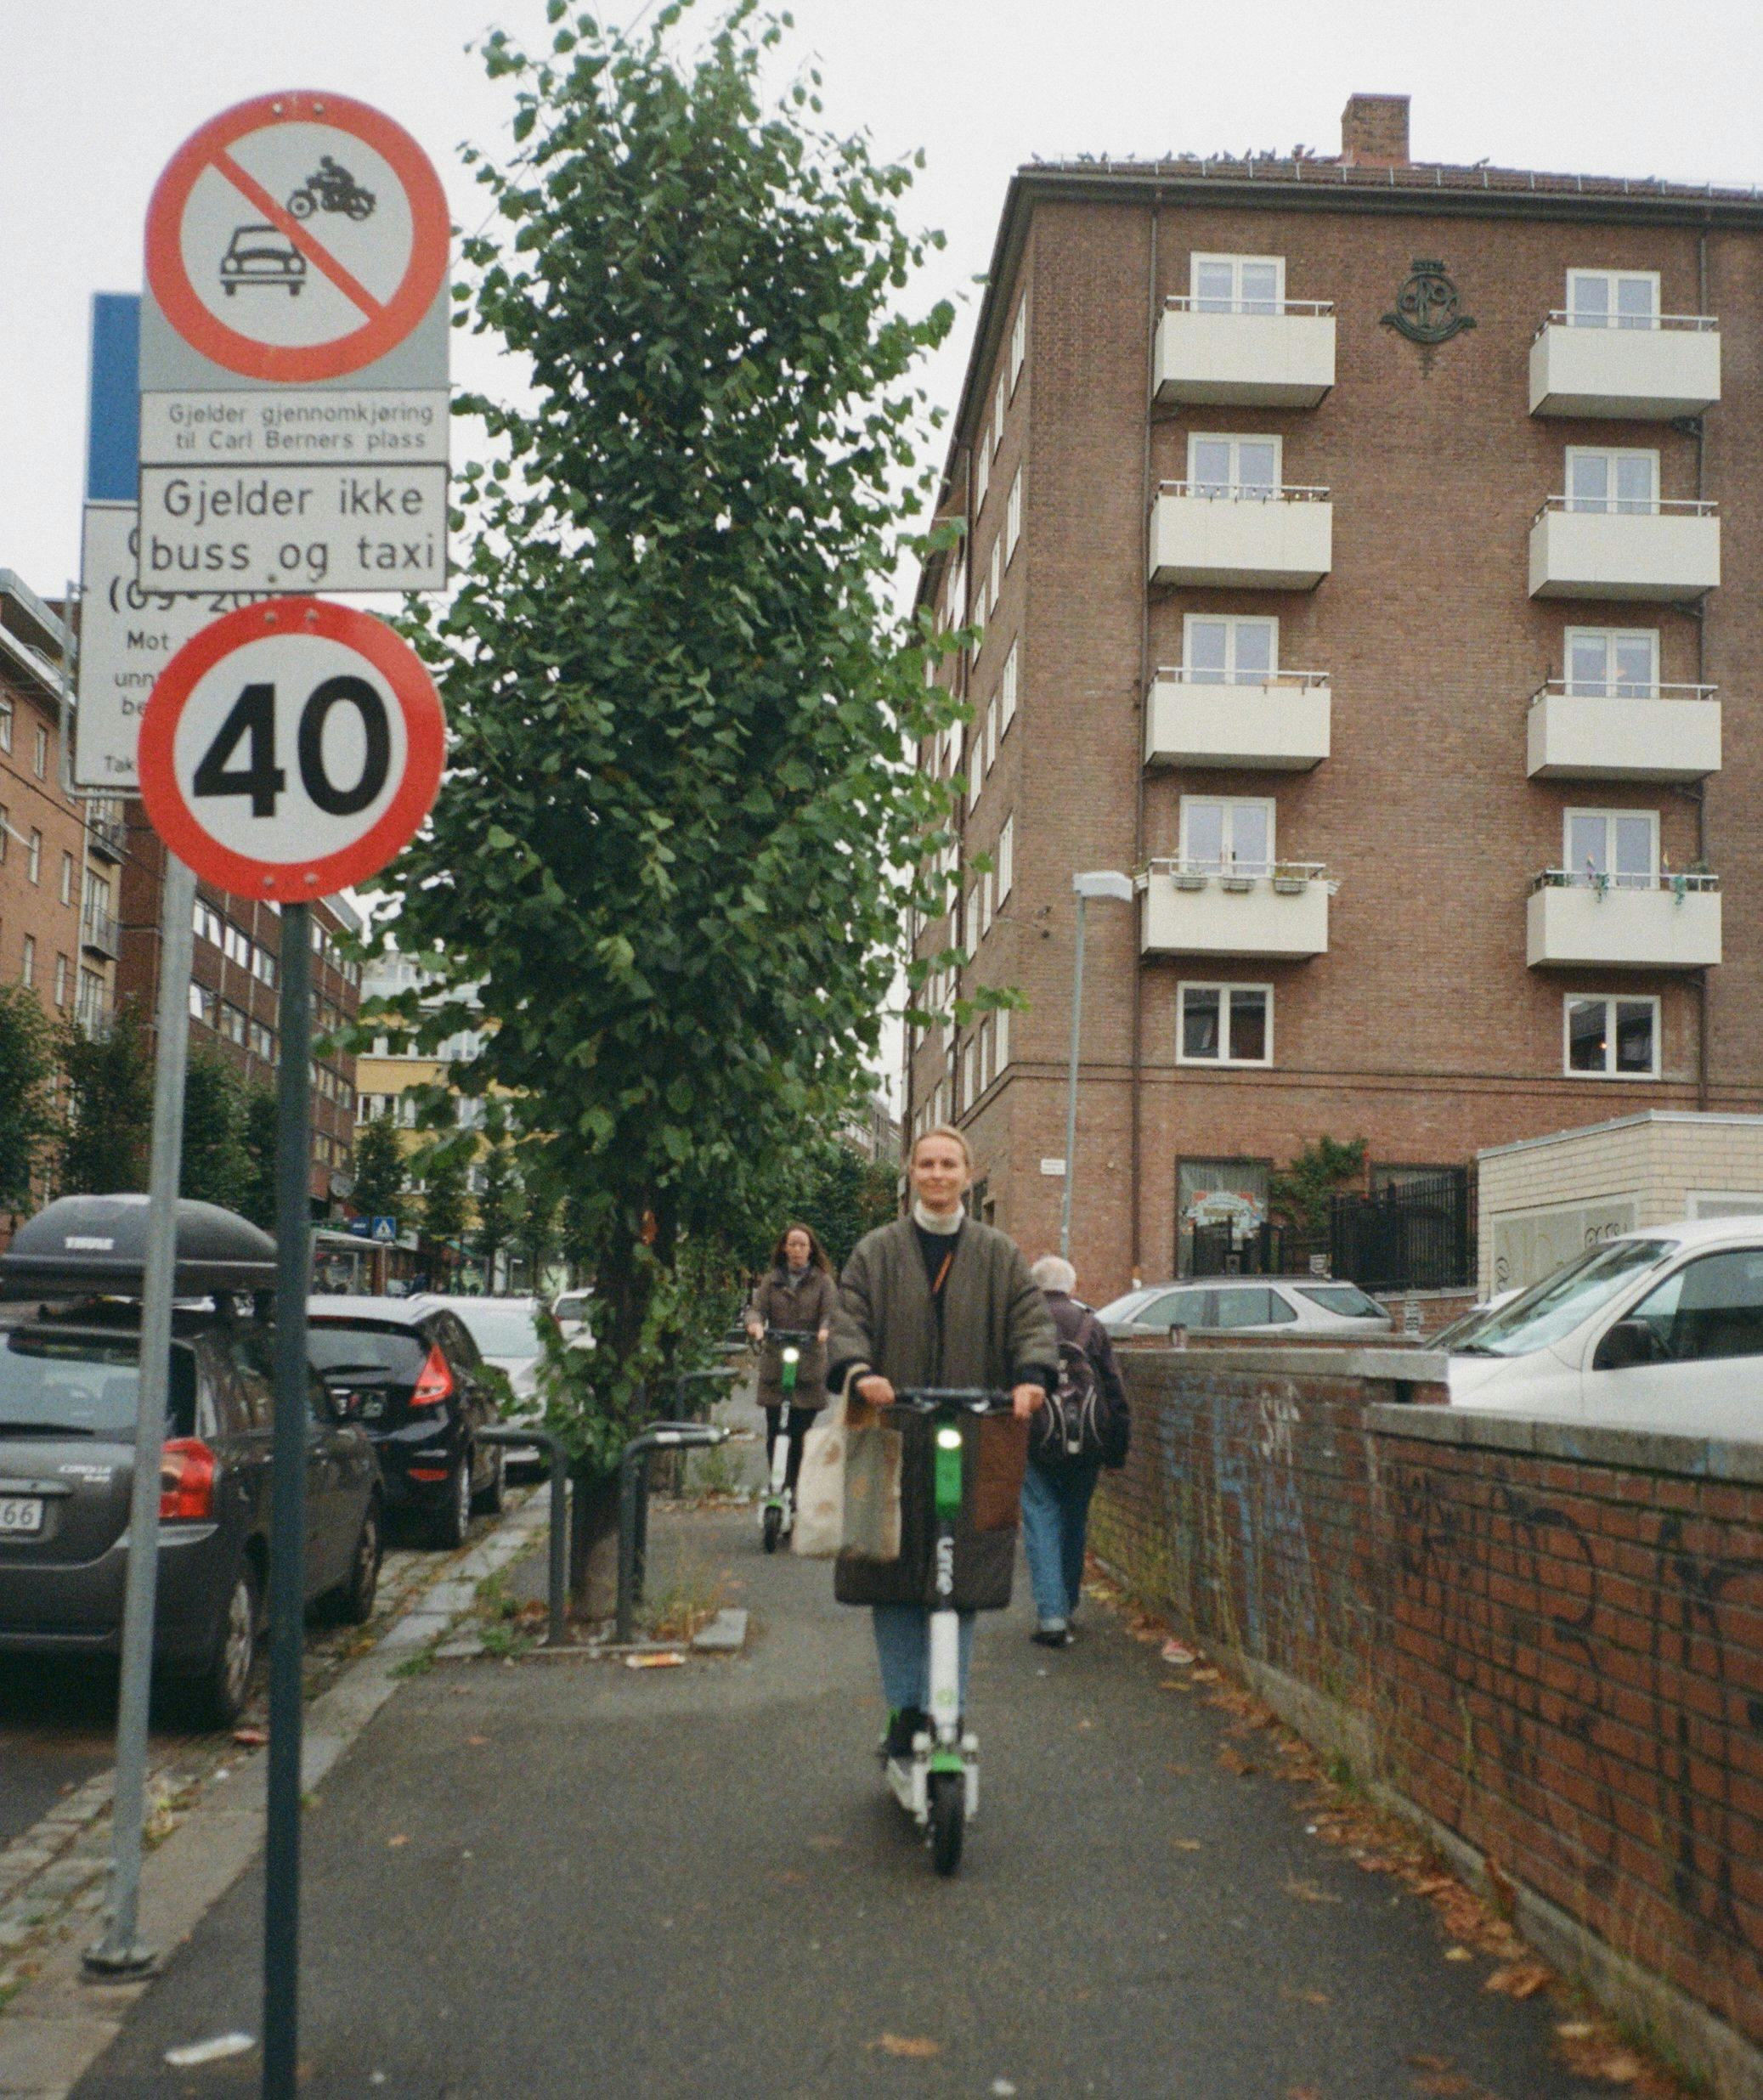 Woman riding an electric scooter